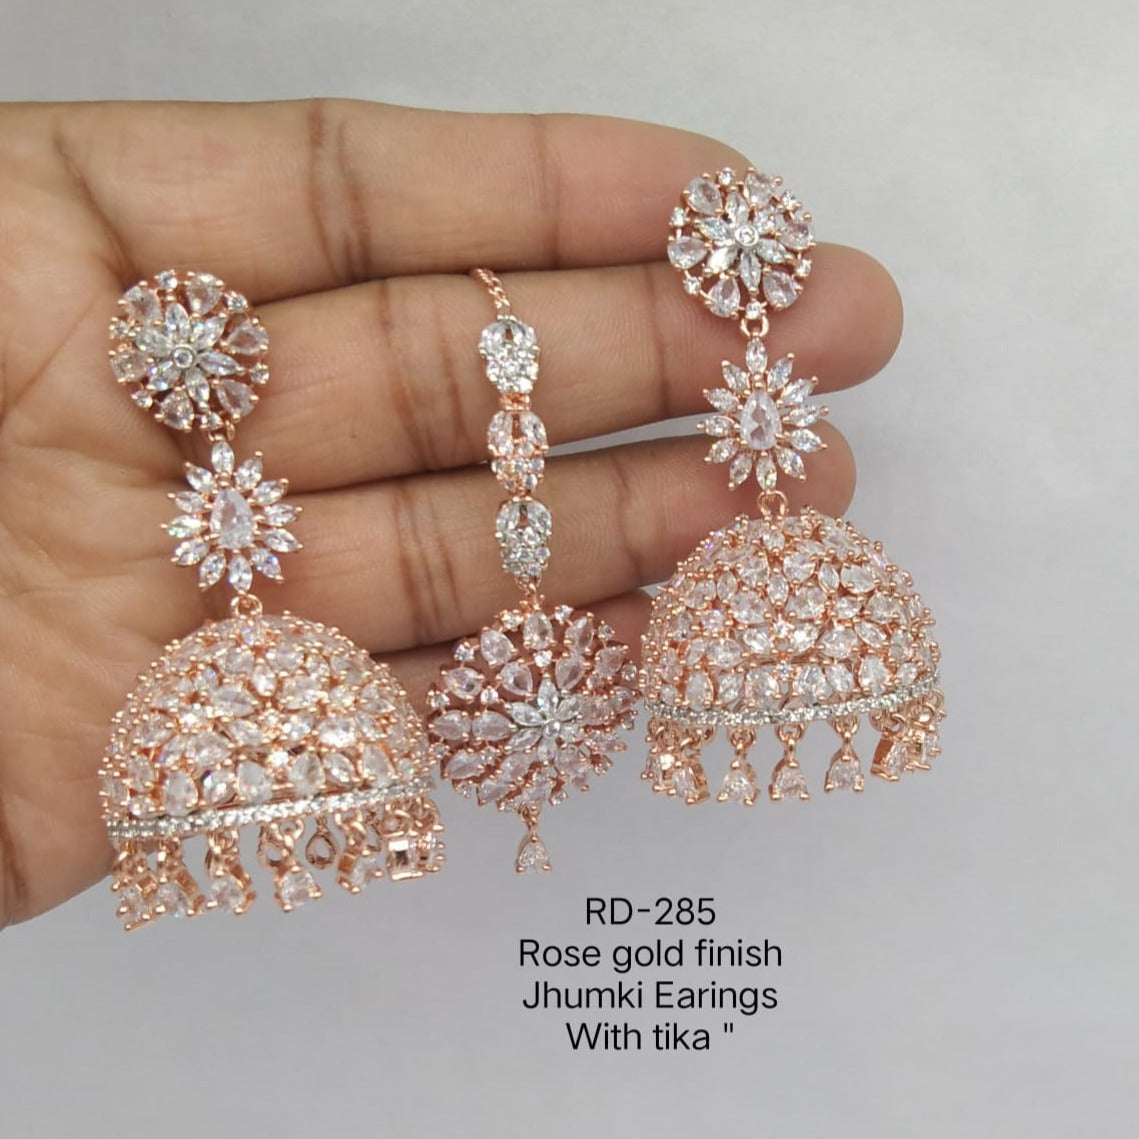 Adorn Yourself with Exquisite Long Jhumka Earrings and Maang Tikka Jewelry